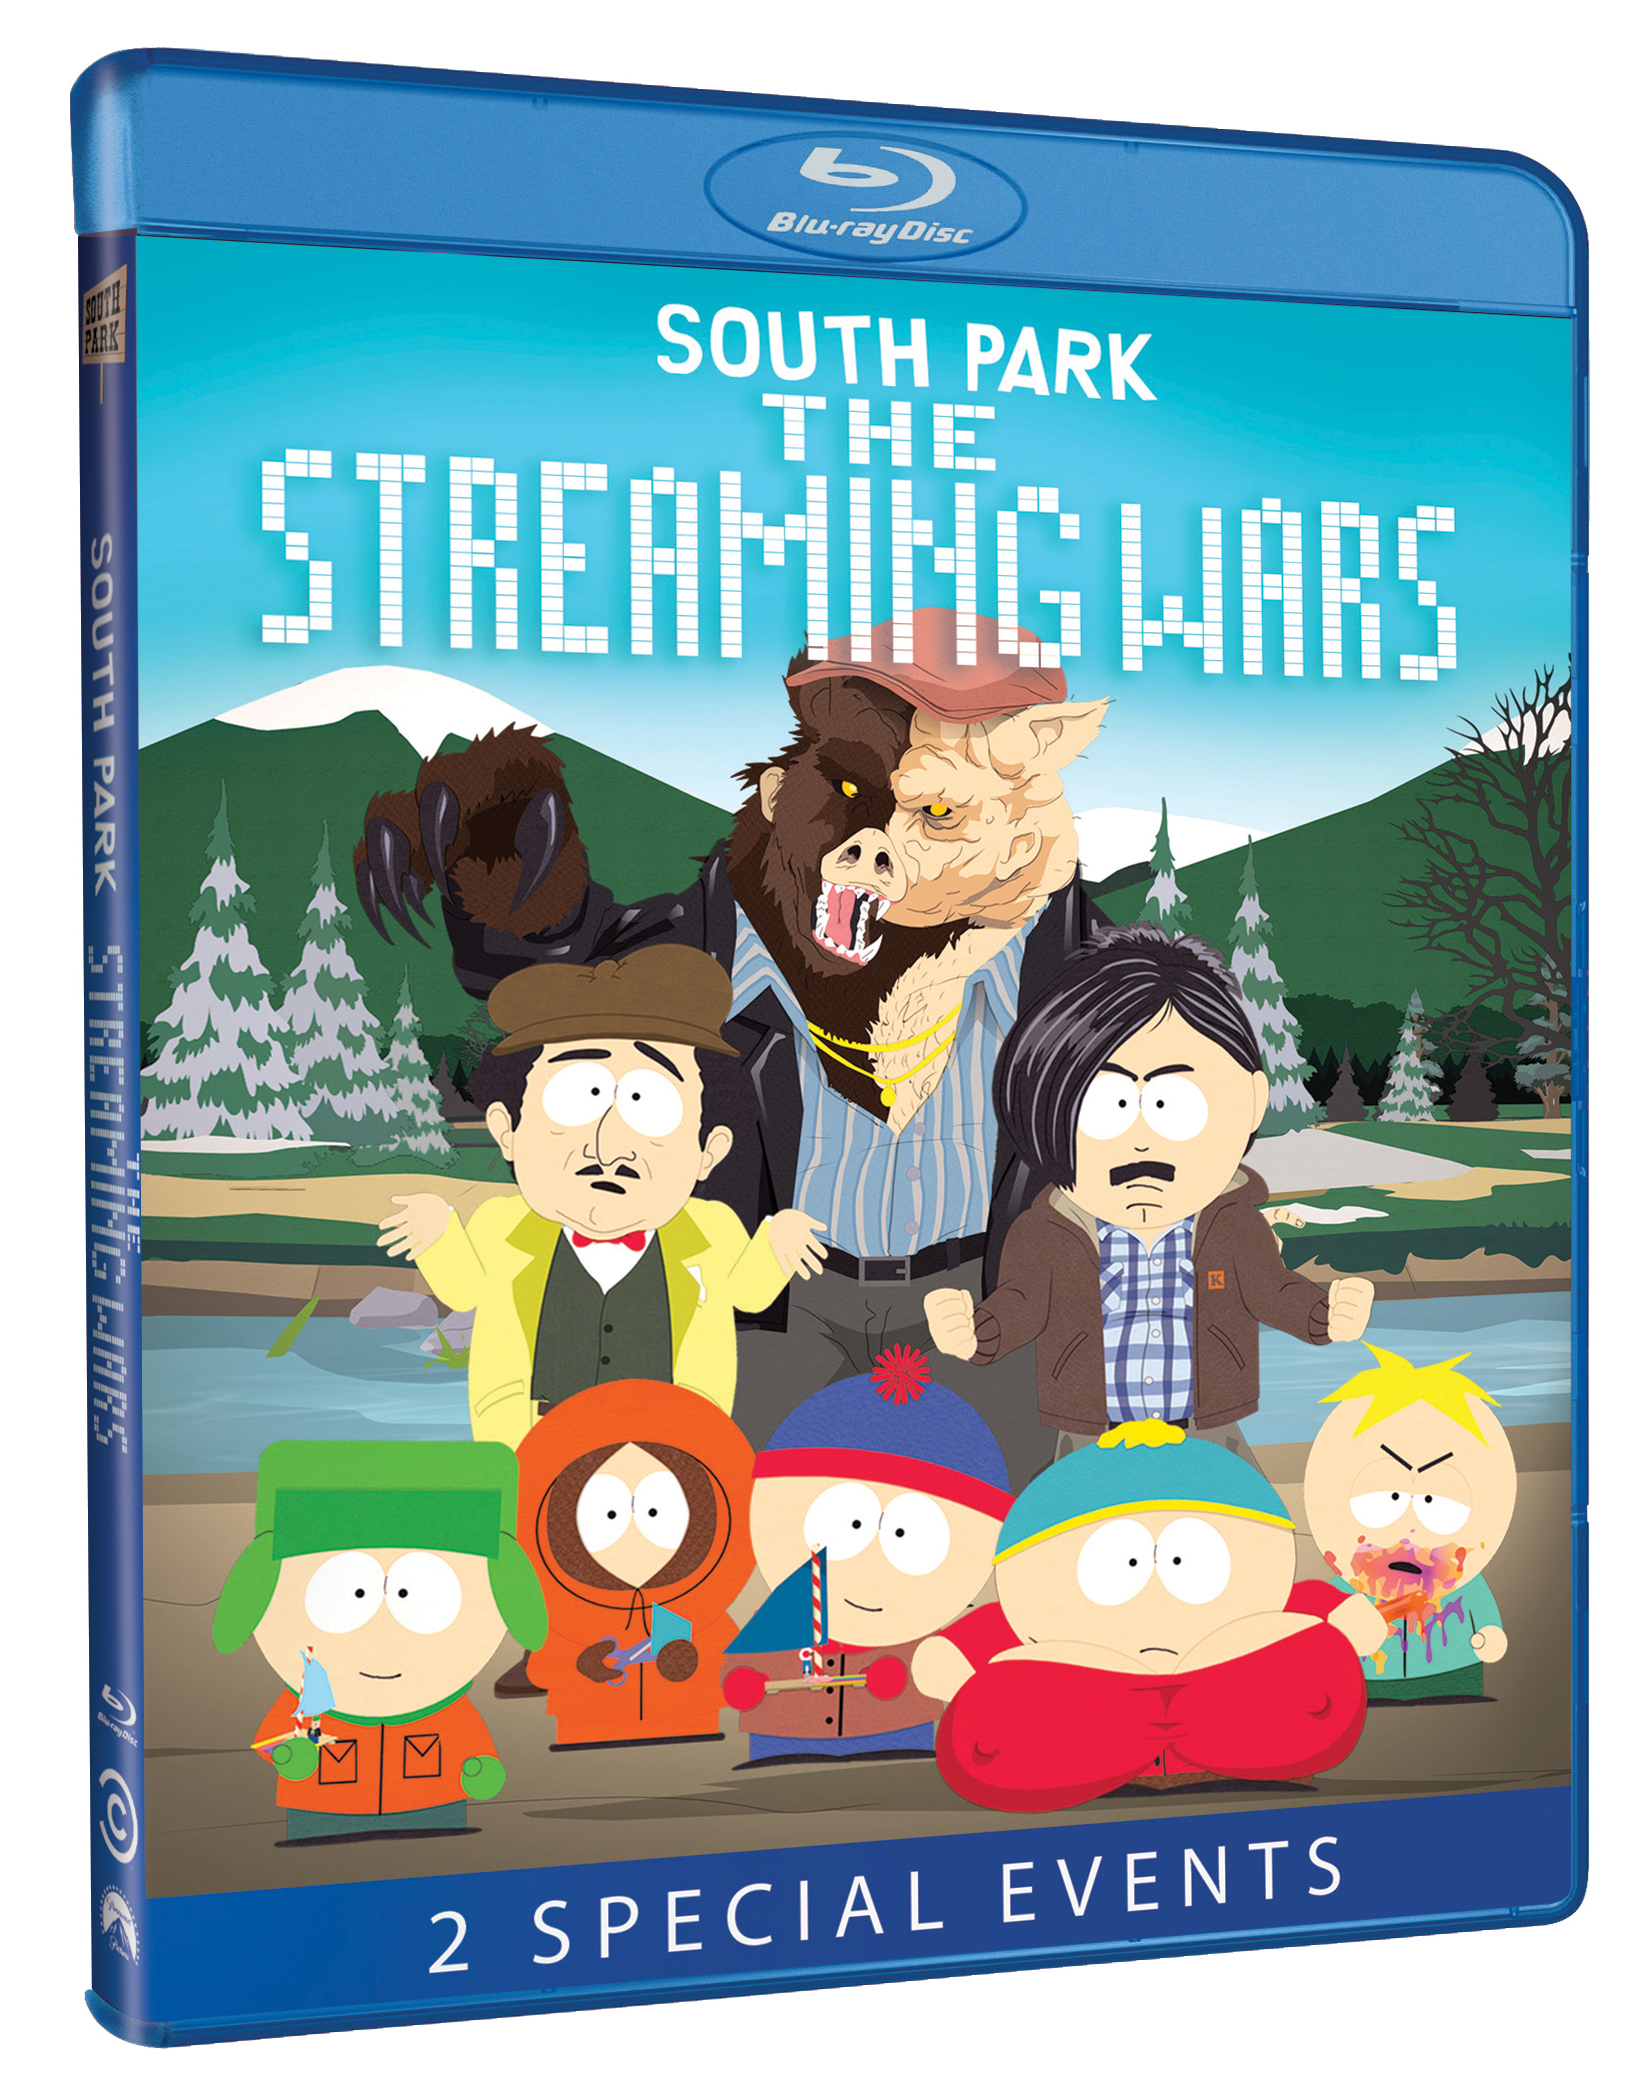 South Park The Streaming Wars Part 2 